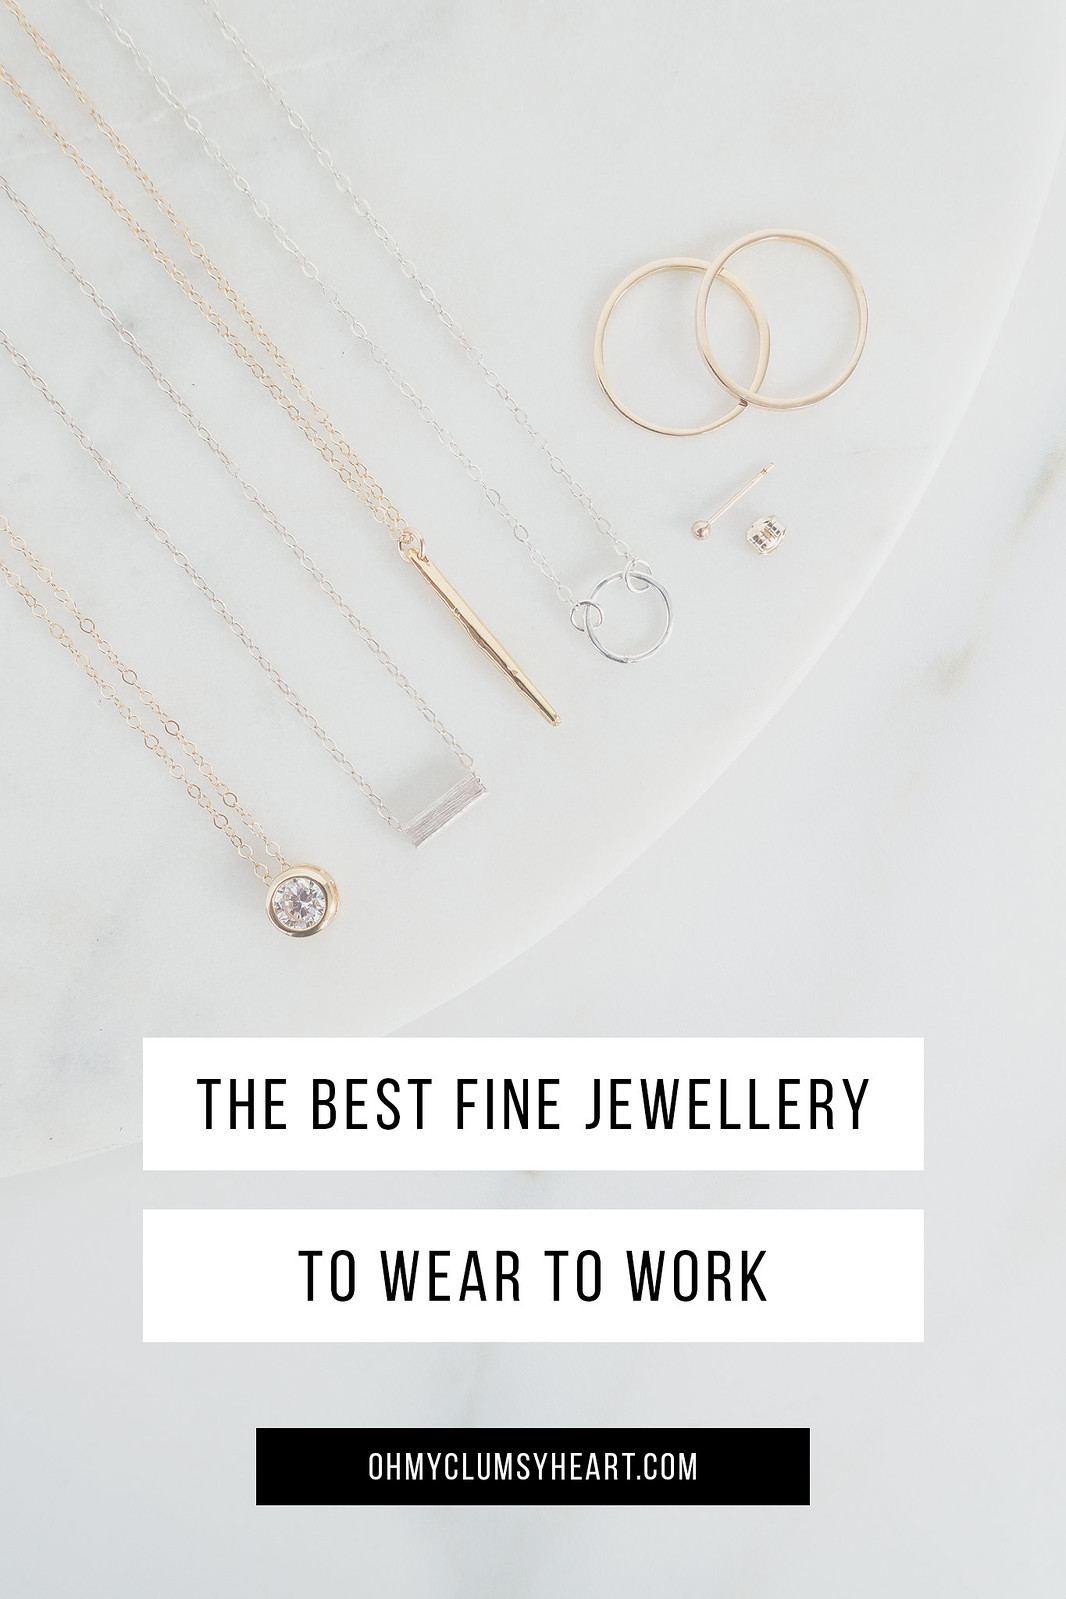 Styling Tips For Wearing Jewellery At Work